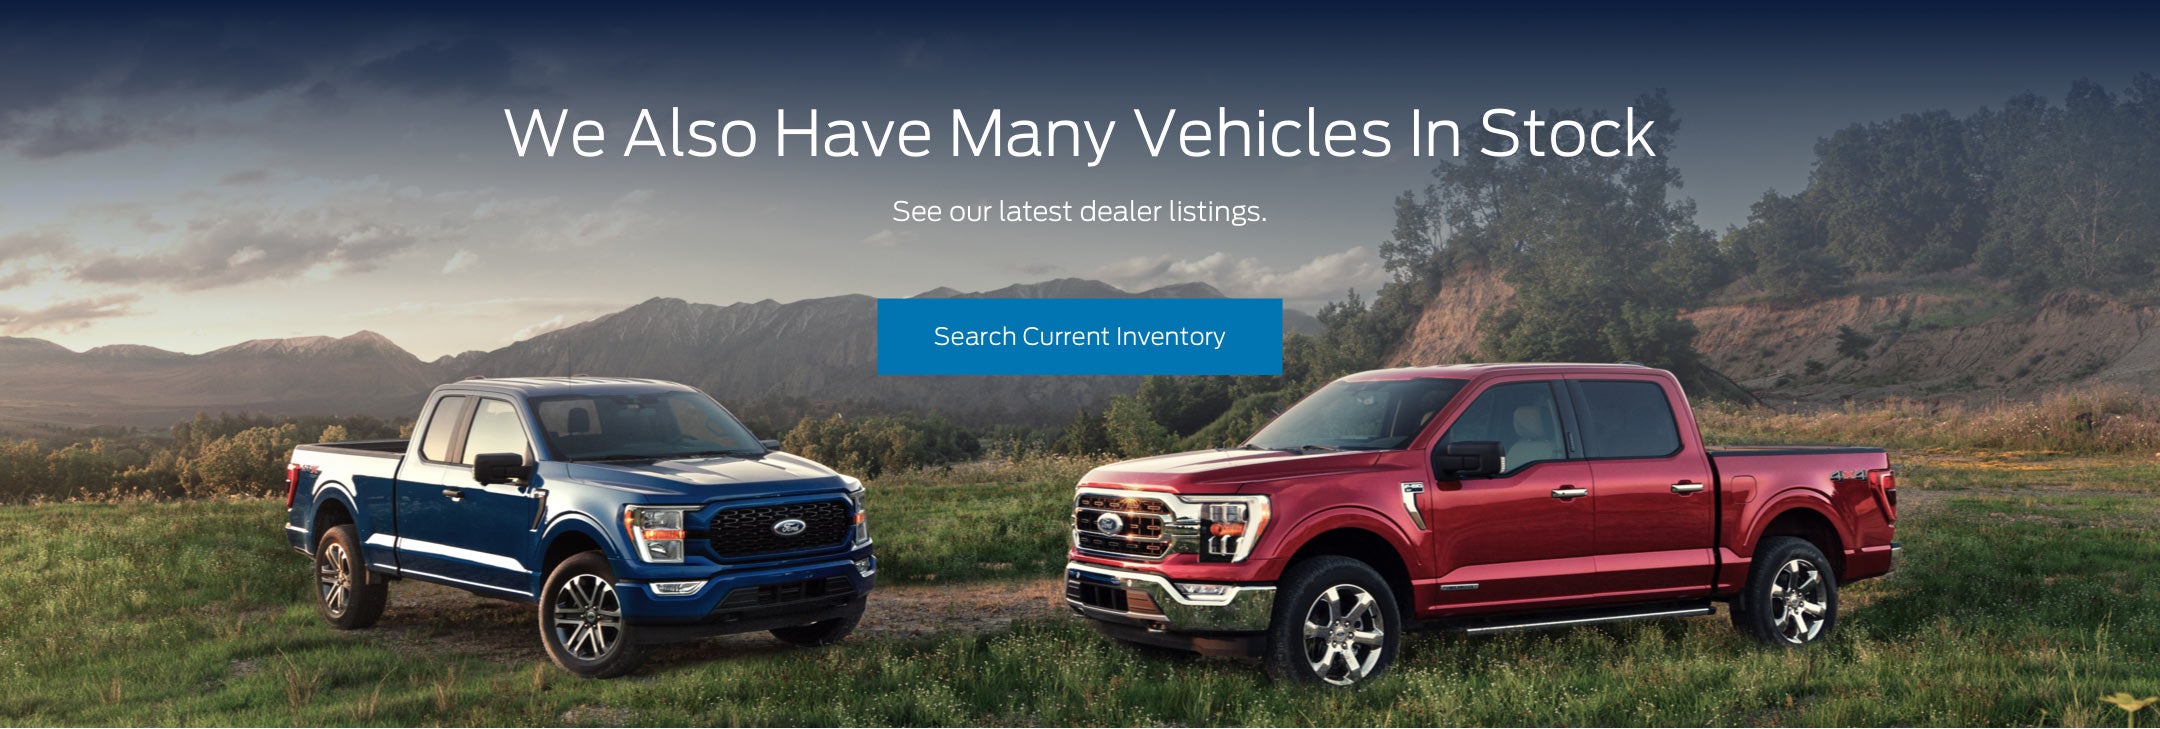 Ford vehicles in stock | Preston Ford West in Randallstown MD